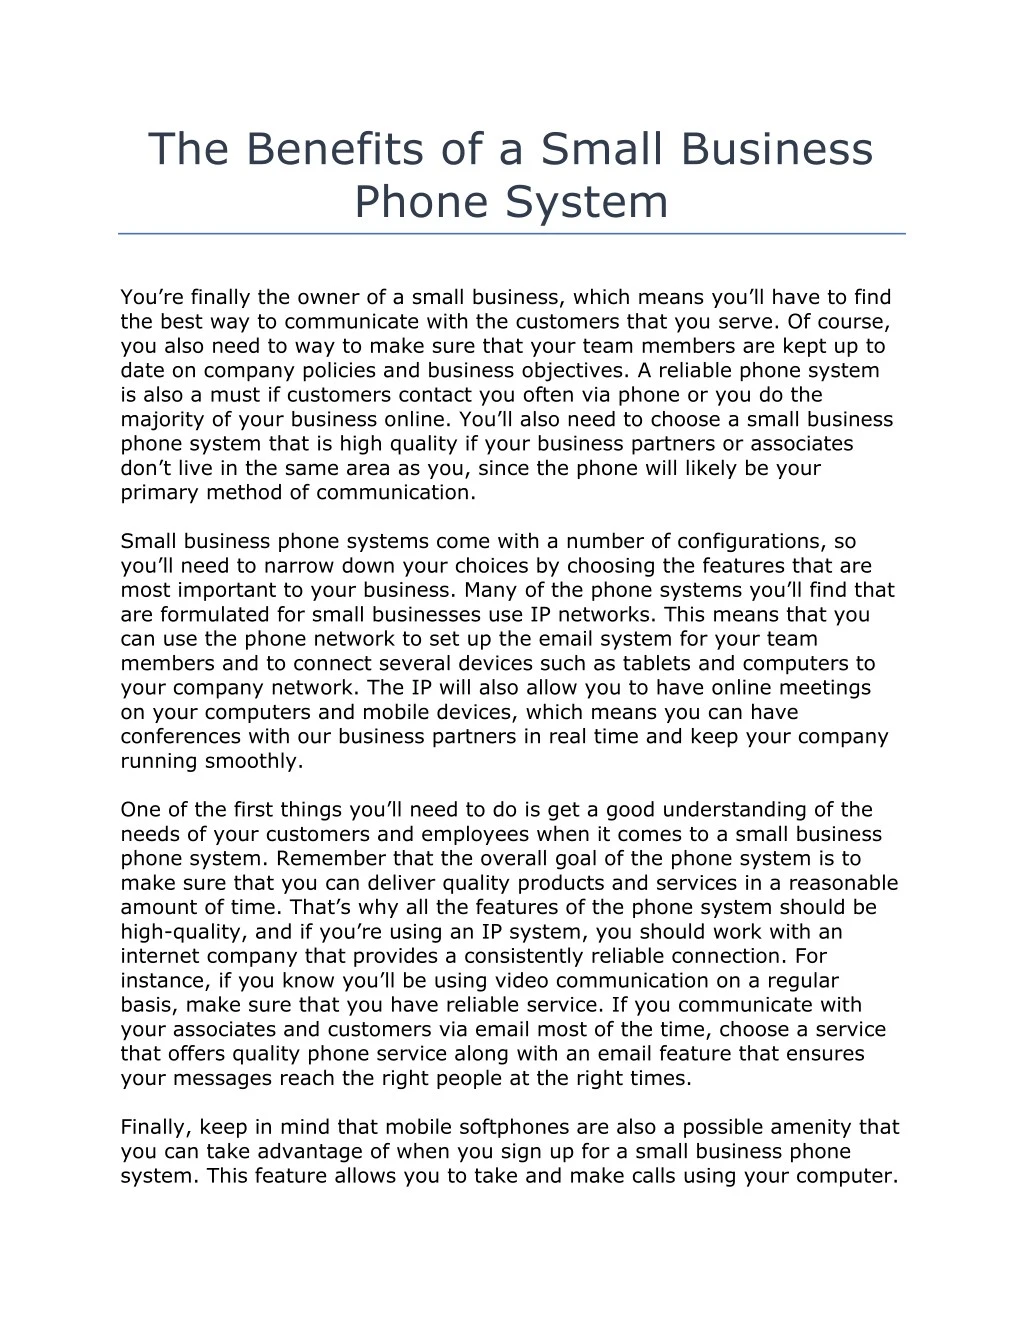 the benefits of a small business phone system